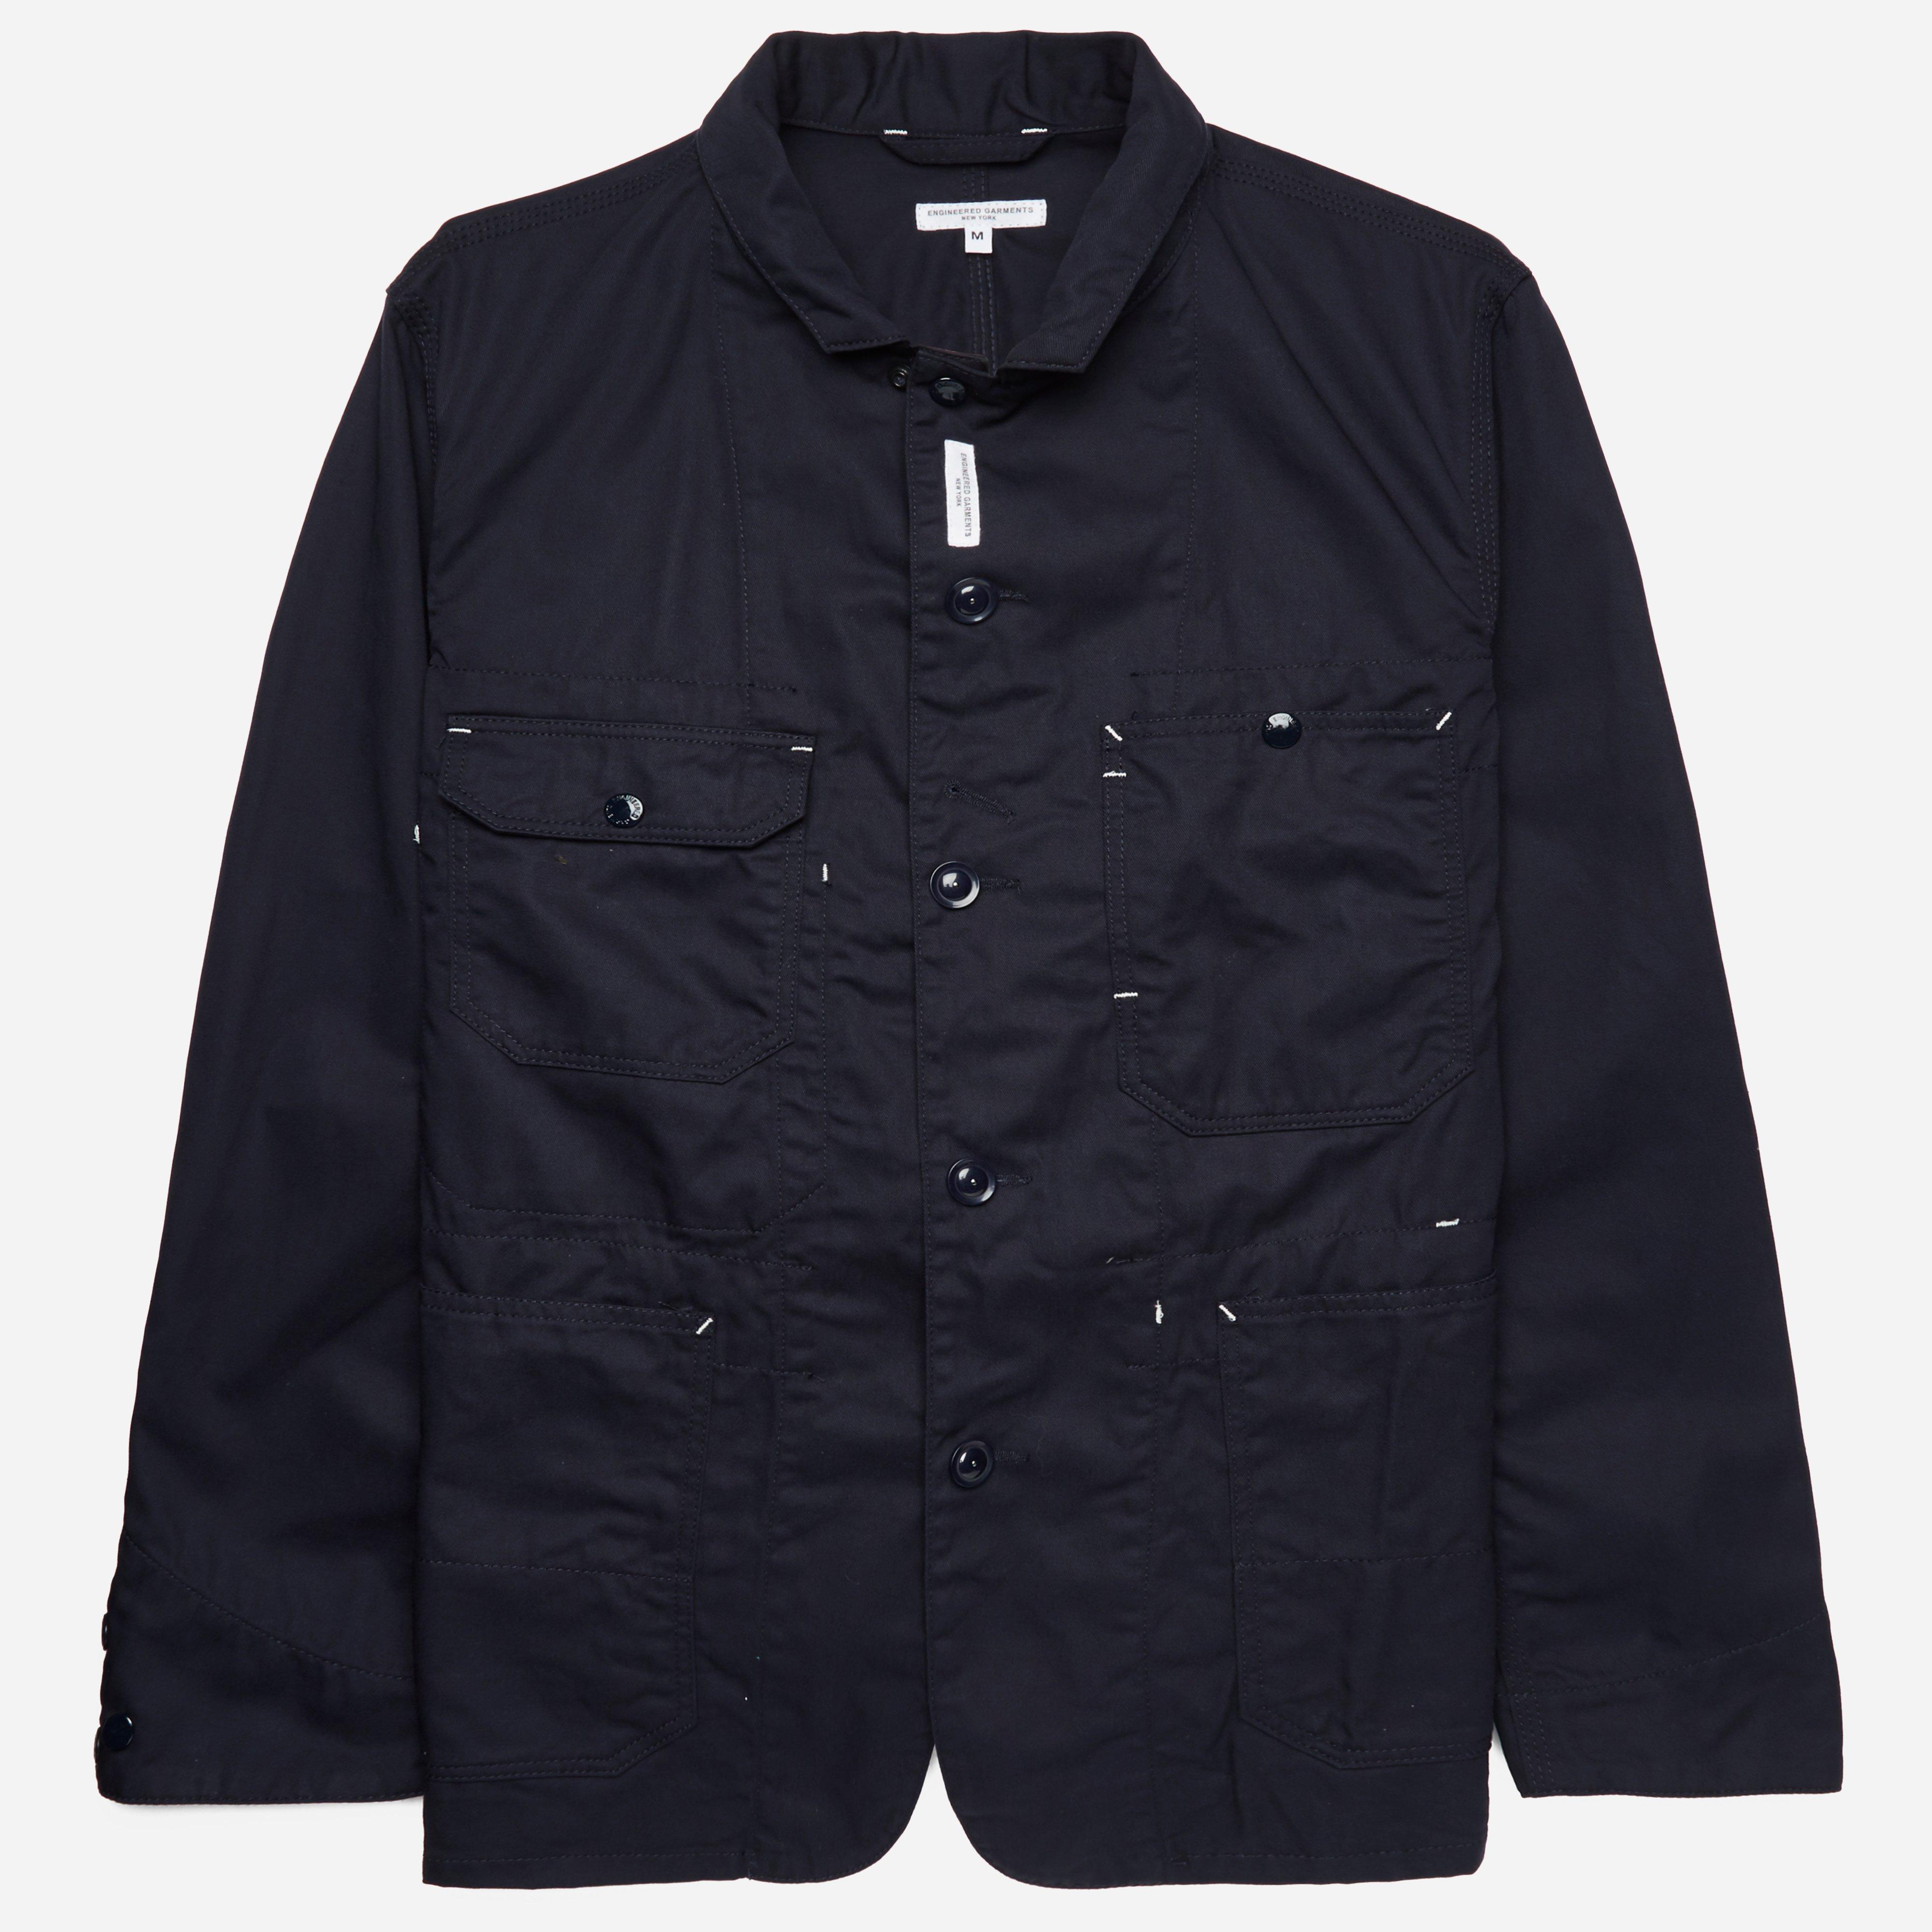 Engineered Garments Coverall Jacket in Navy (Blue) for Men - Lyst